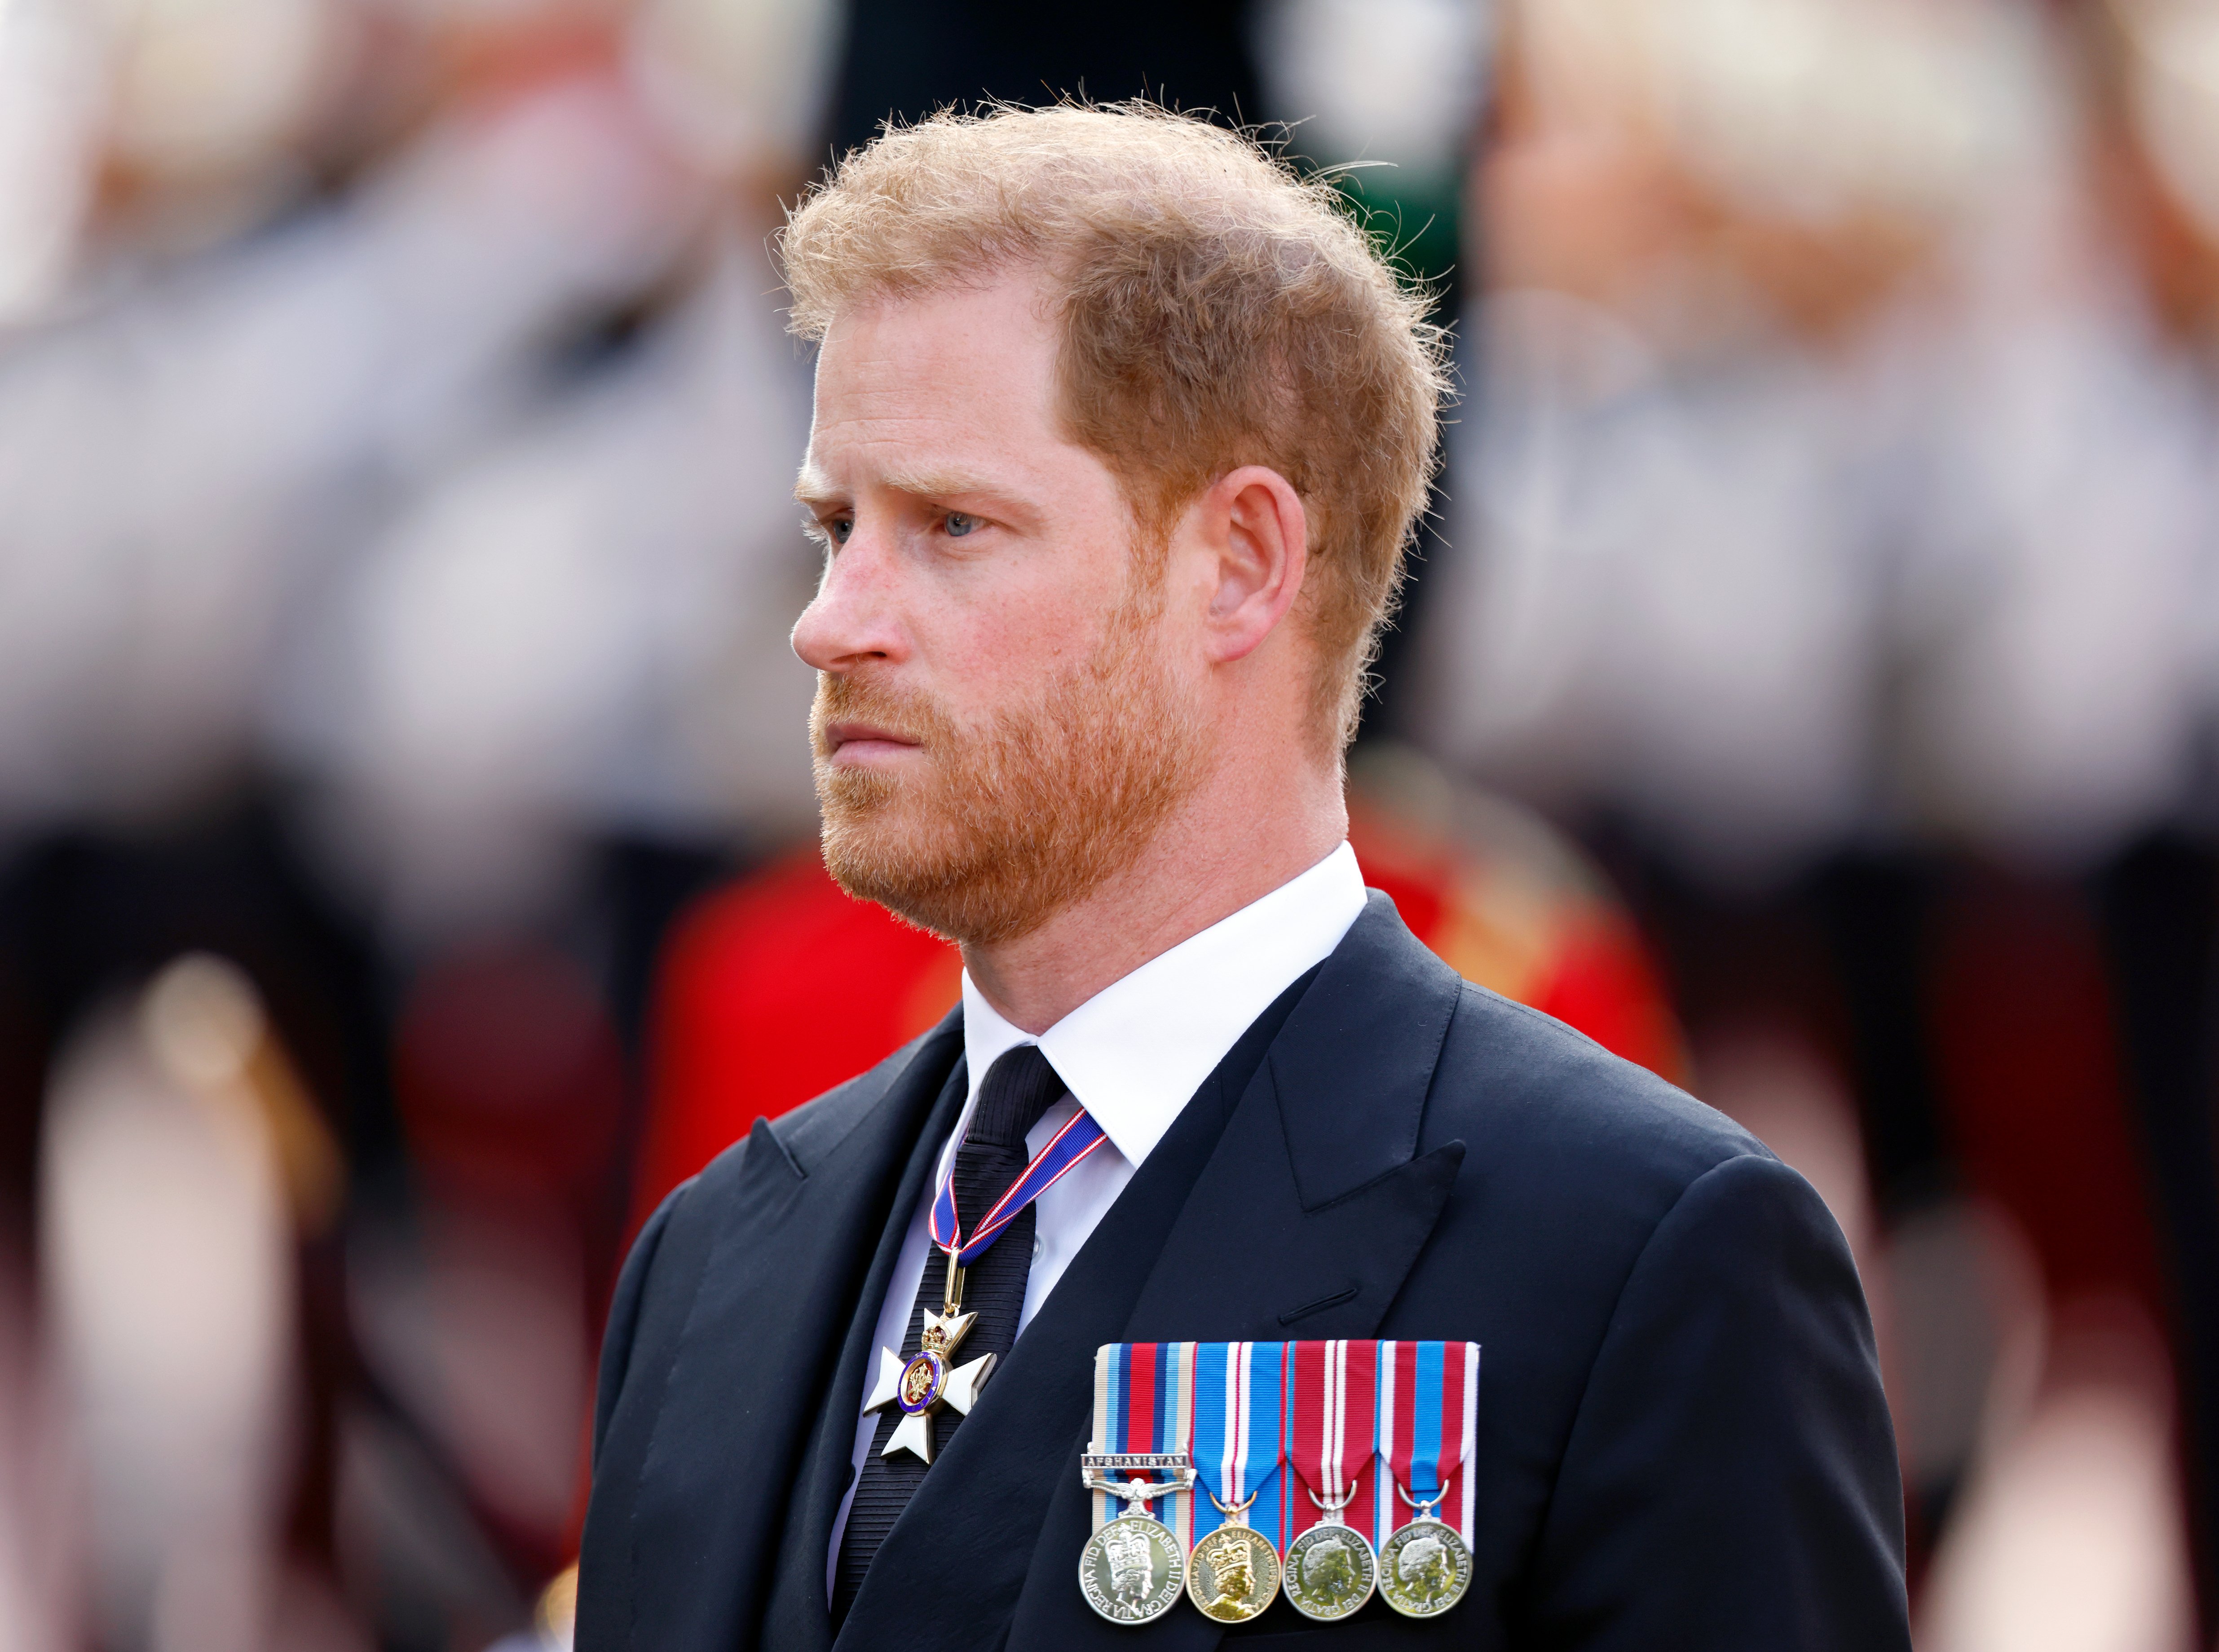 Prince Harry walks behind Queen Elizabeth II's coffin from Buckingham Palace to The Palace of Westminster on September 14, 2022, in London, United Kingdom | Source: Getty Images